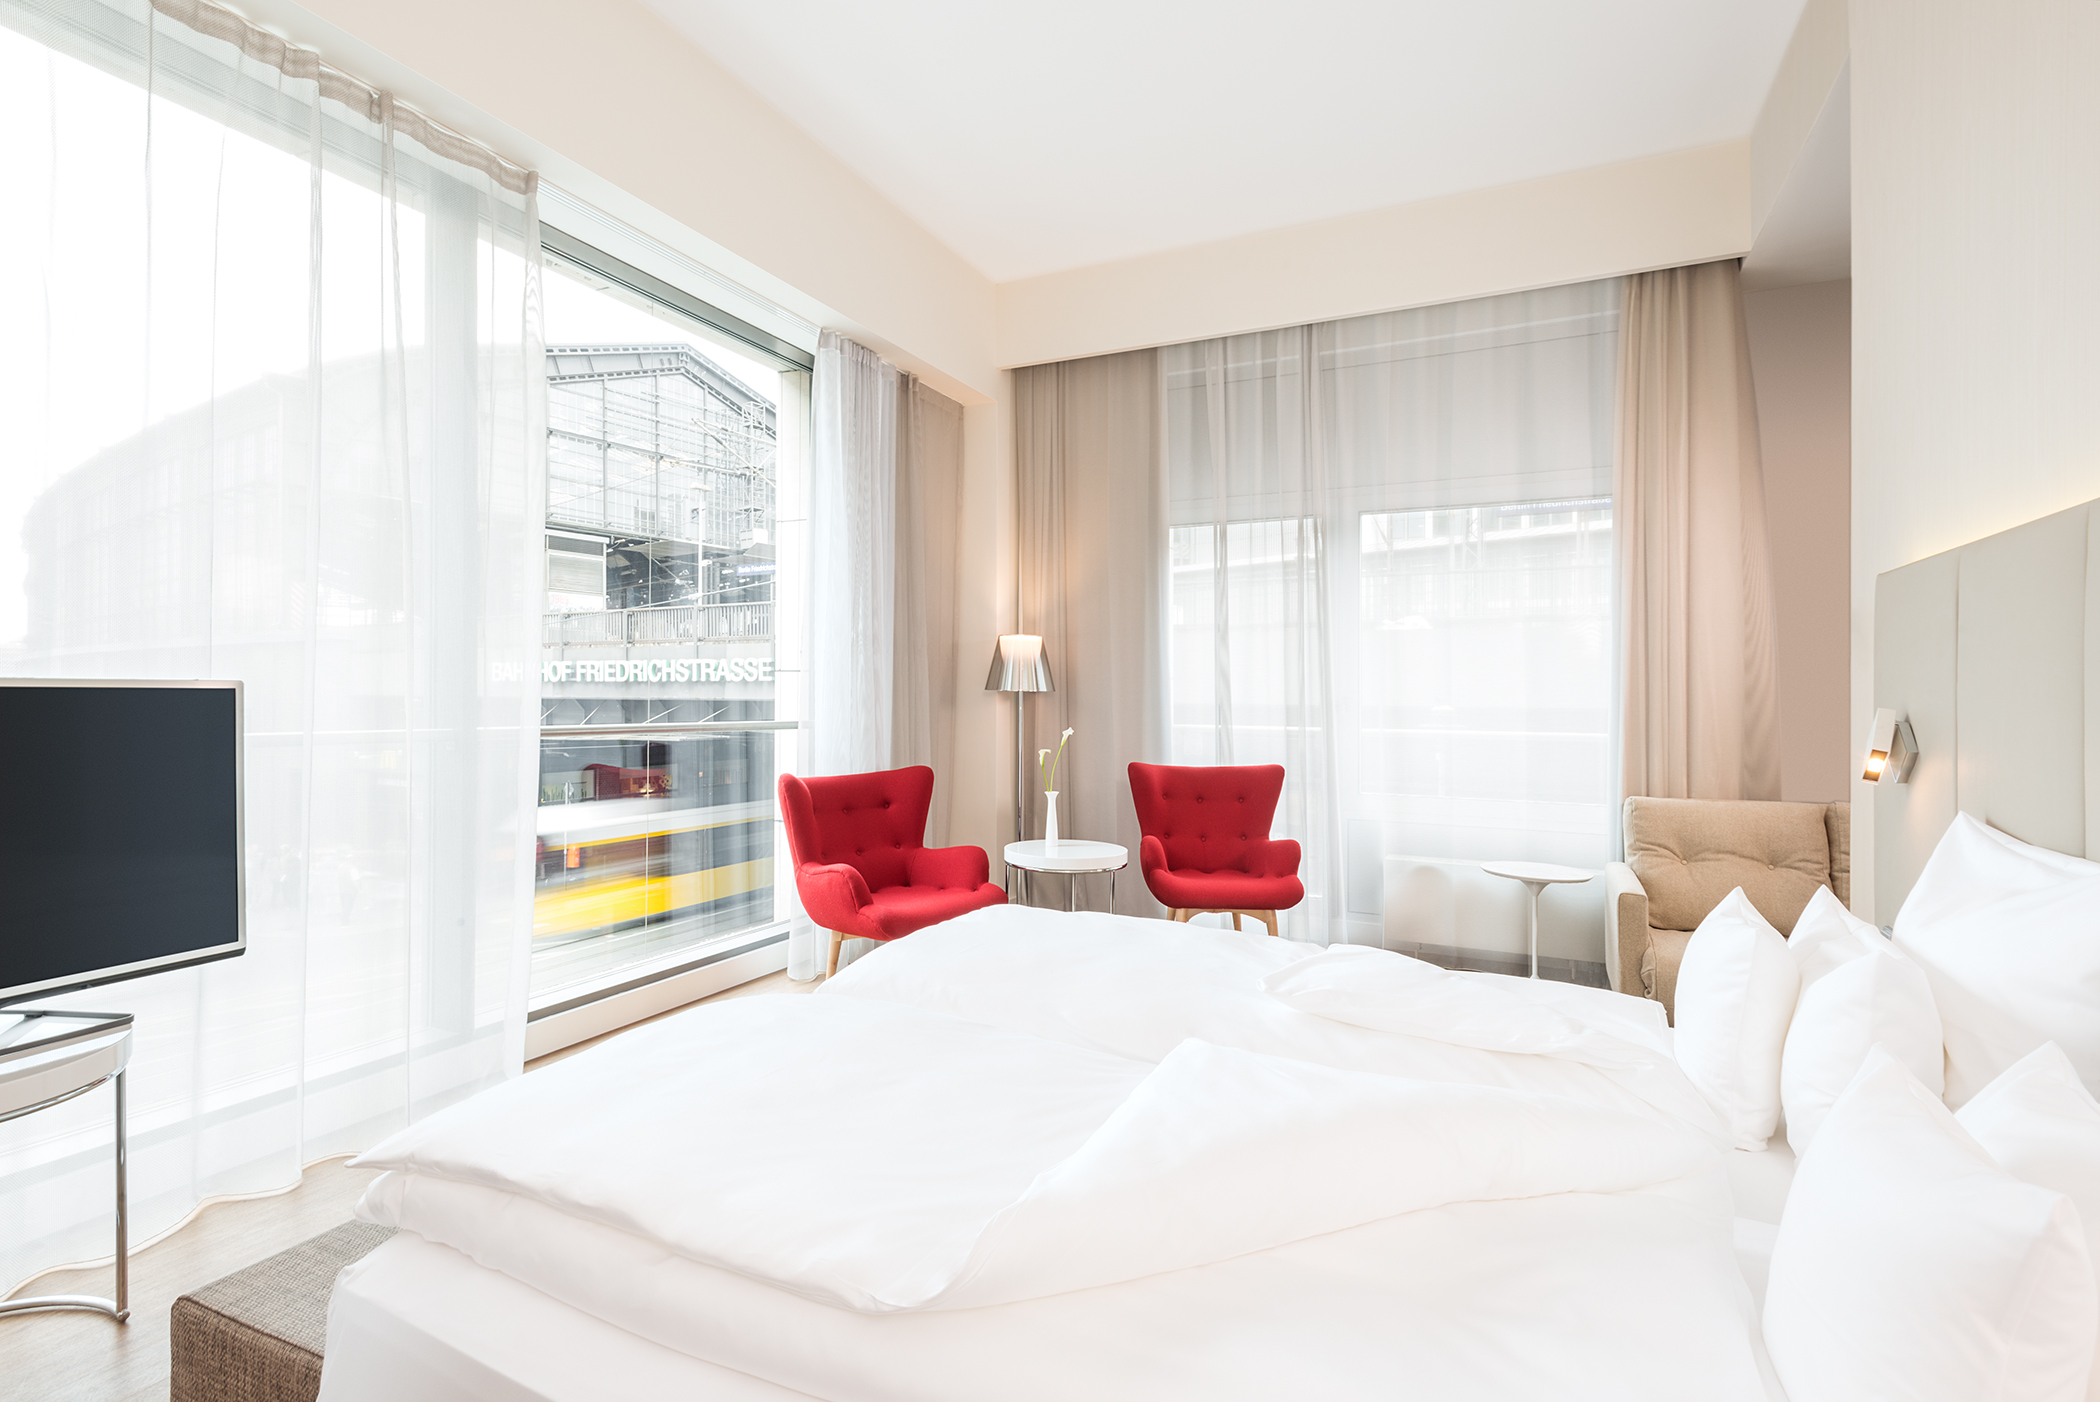 NH Collection Berlin Mitte Friedrichstrasse <br/>97.00 ew <br/> <a href='http://vakantieoplossing.nl/outpage/?id=a66e69ddf8971d9370f46362bef68ca5' target='_blank'>View Details</a>